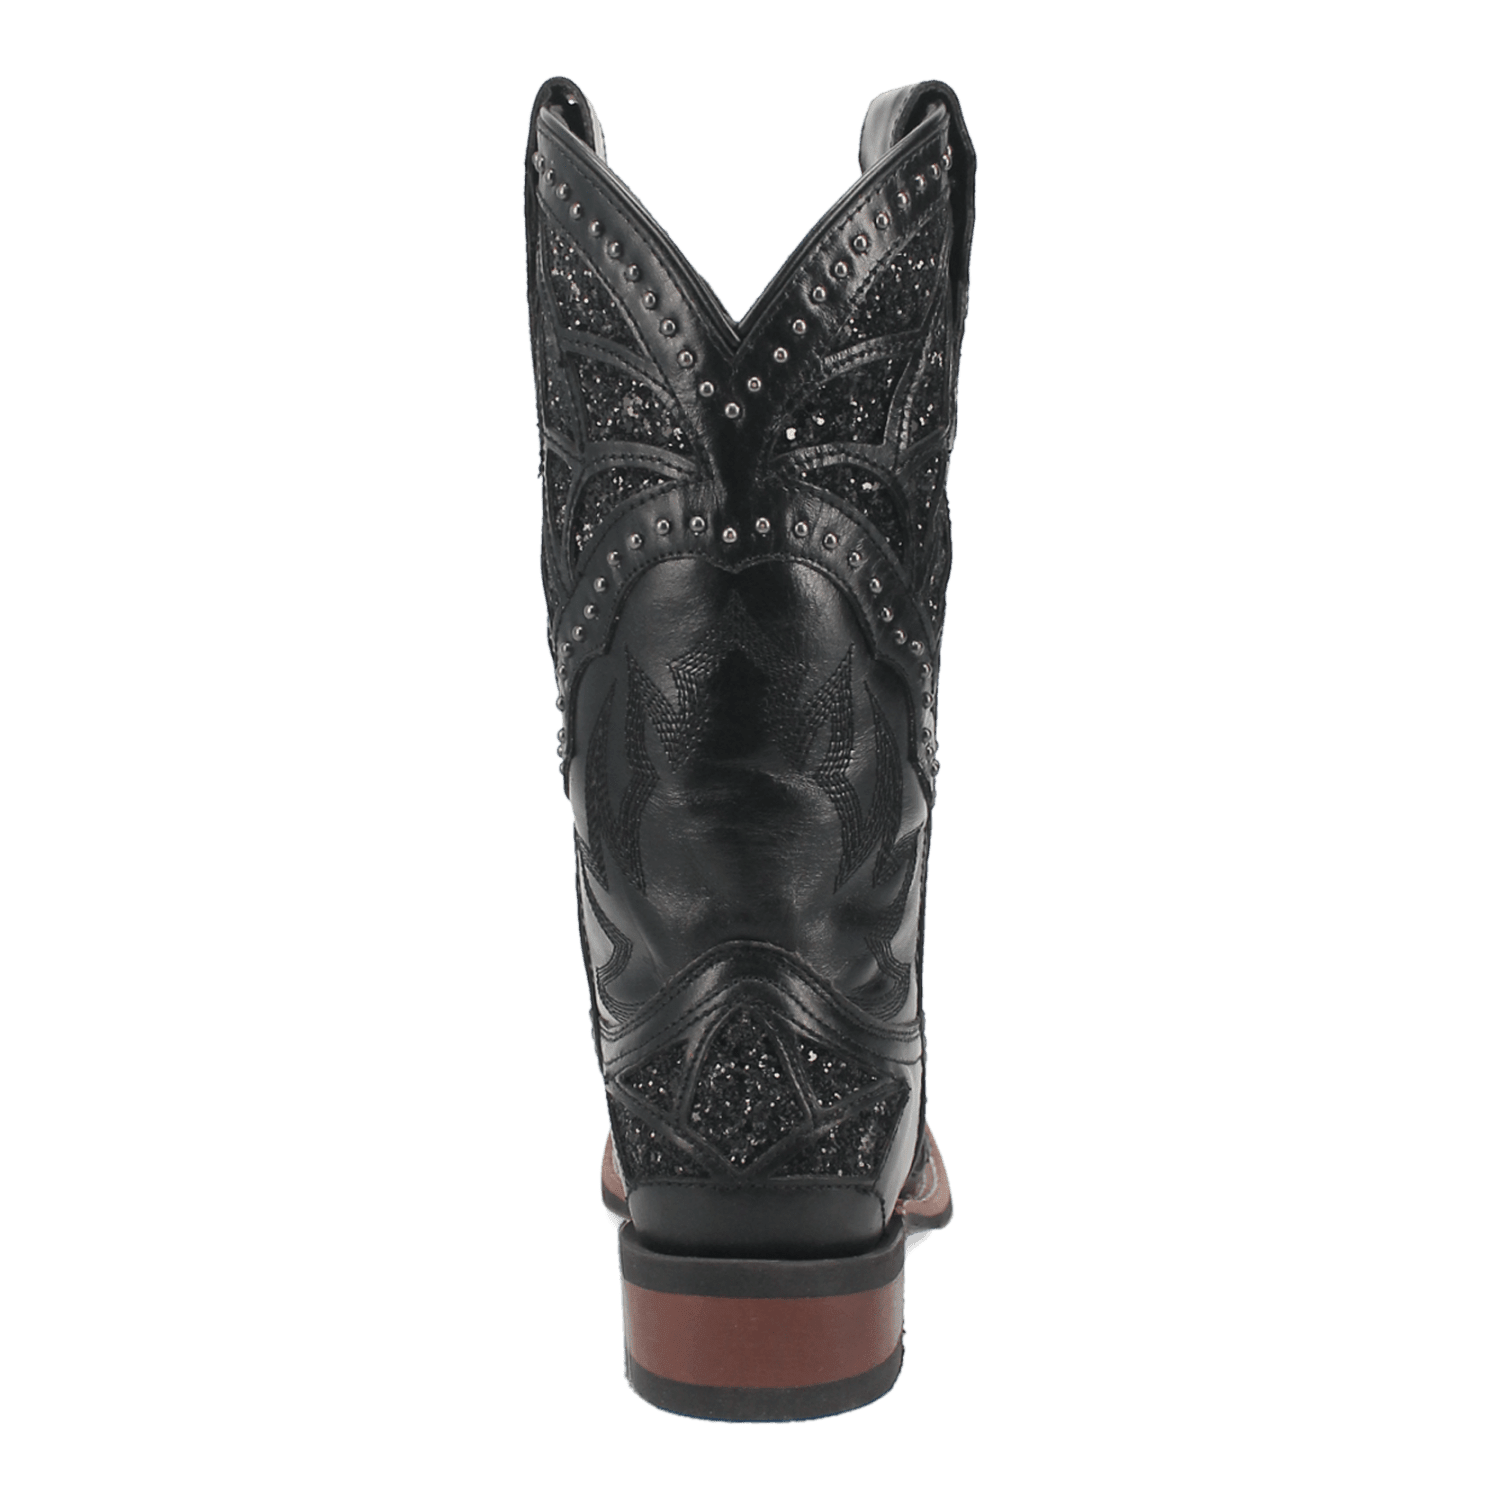 ETERNITY LEATHER BOOT Image